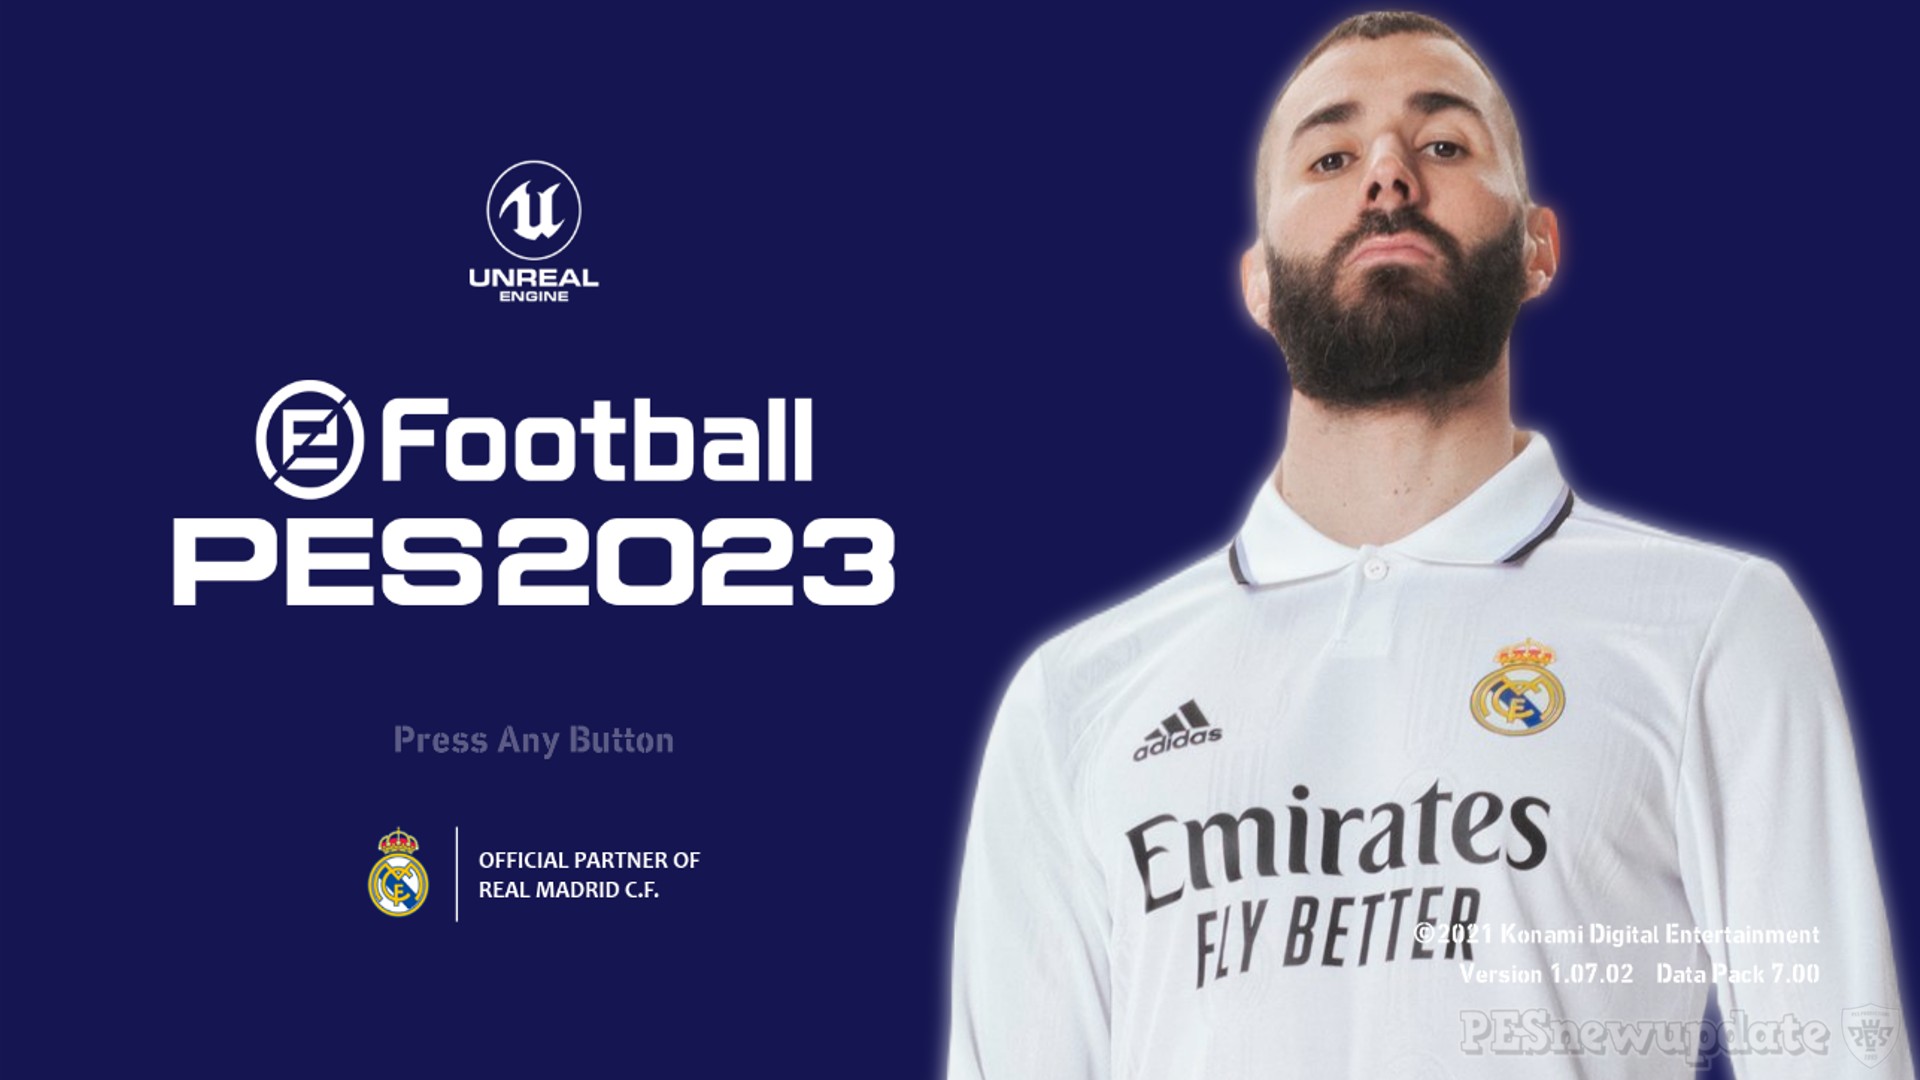 PES 2021 Menu Real Madrid 2022 2023 By PESNewupdate PESNewupdate.com. Free Download Latest Pro Evolution Soccer Patch & Updates